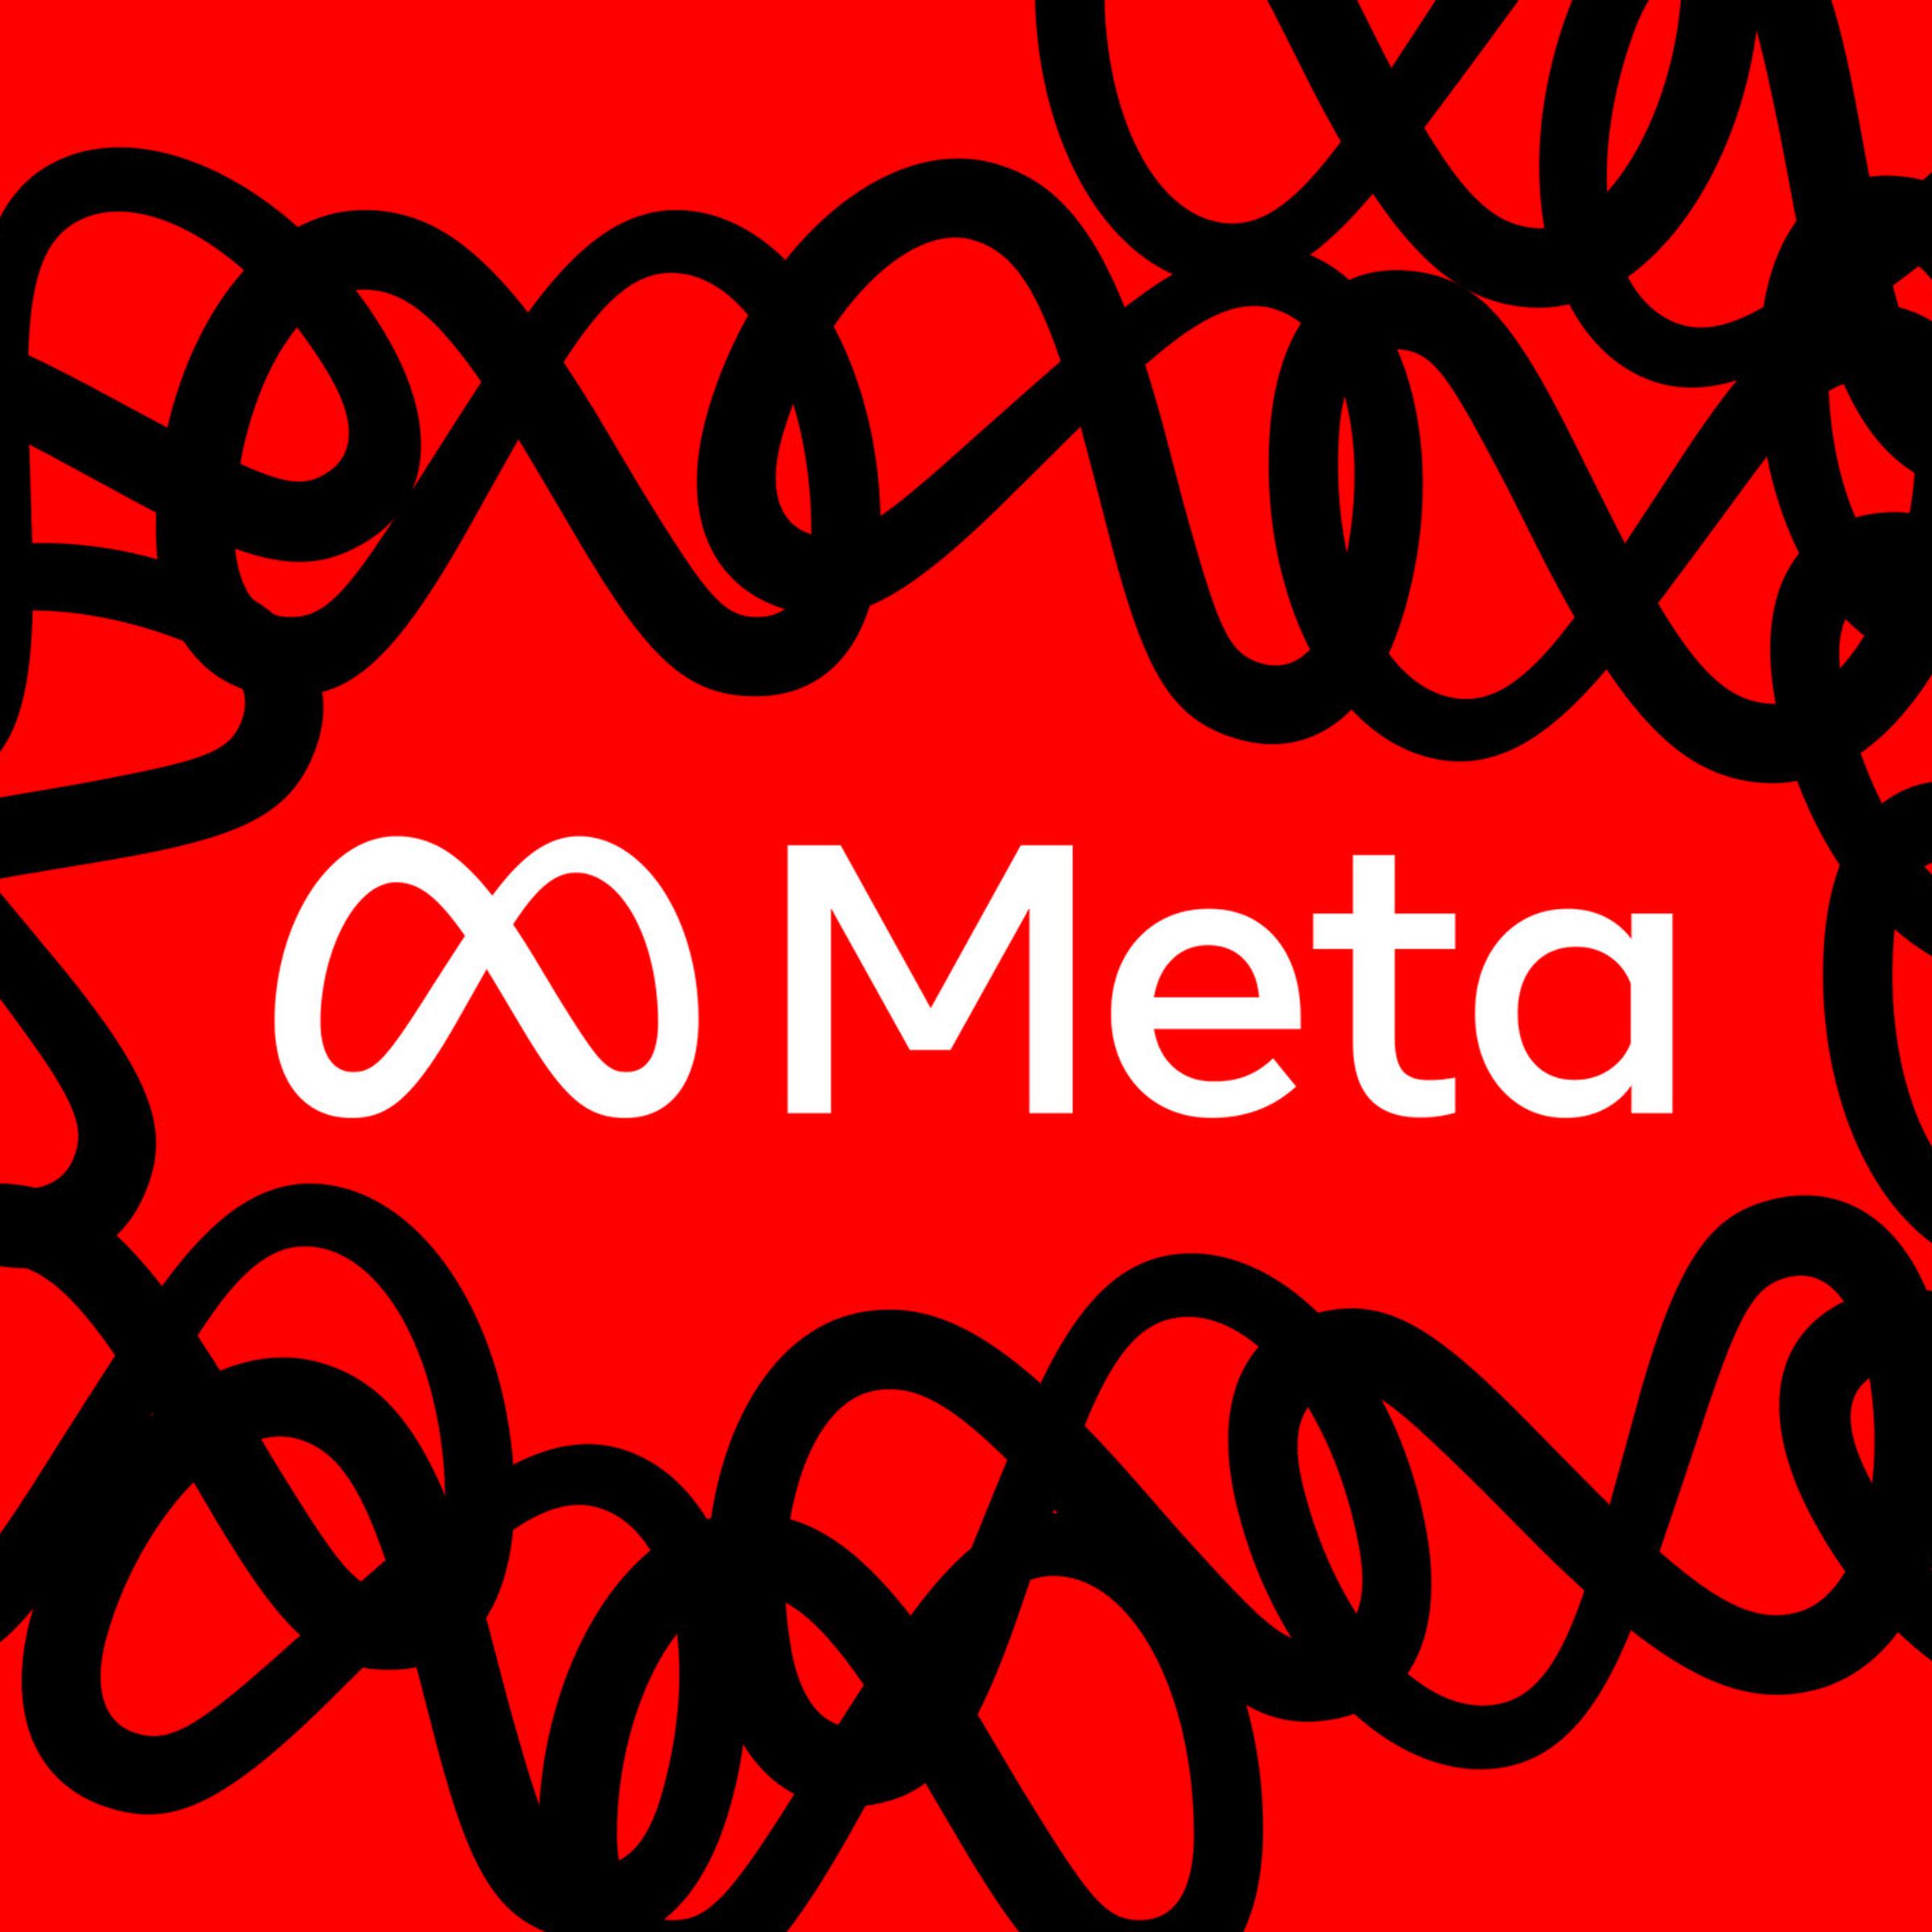 Meta logo in white on red background